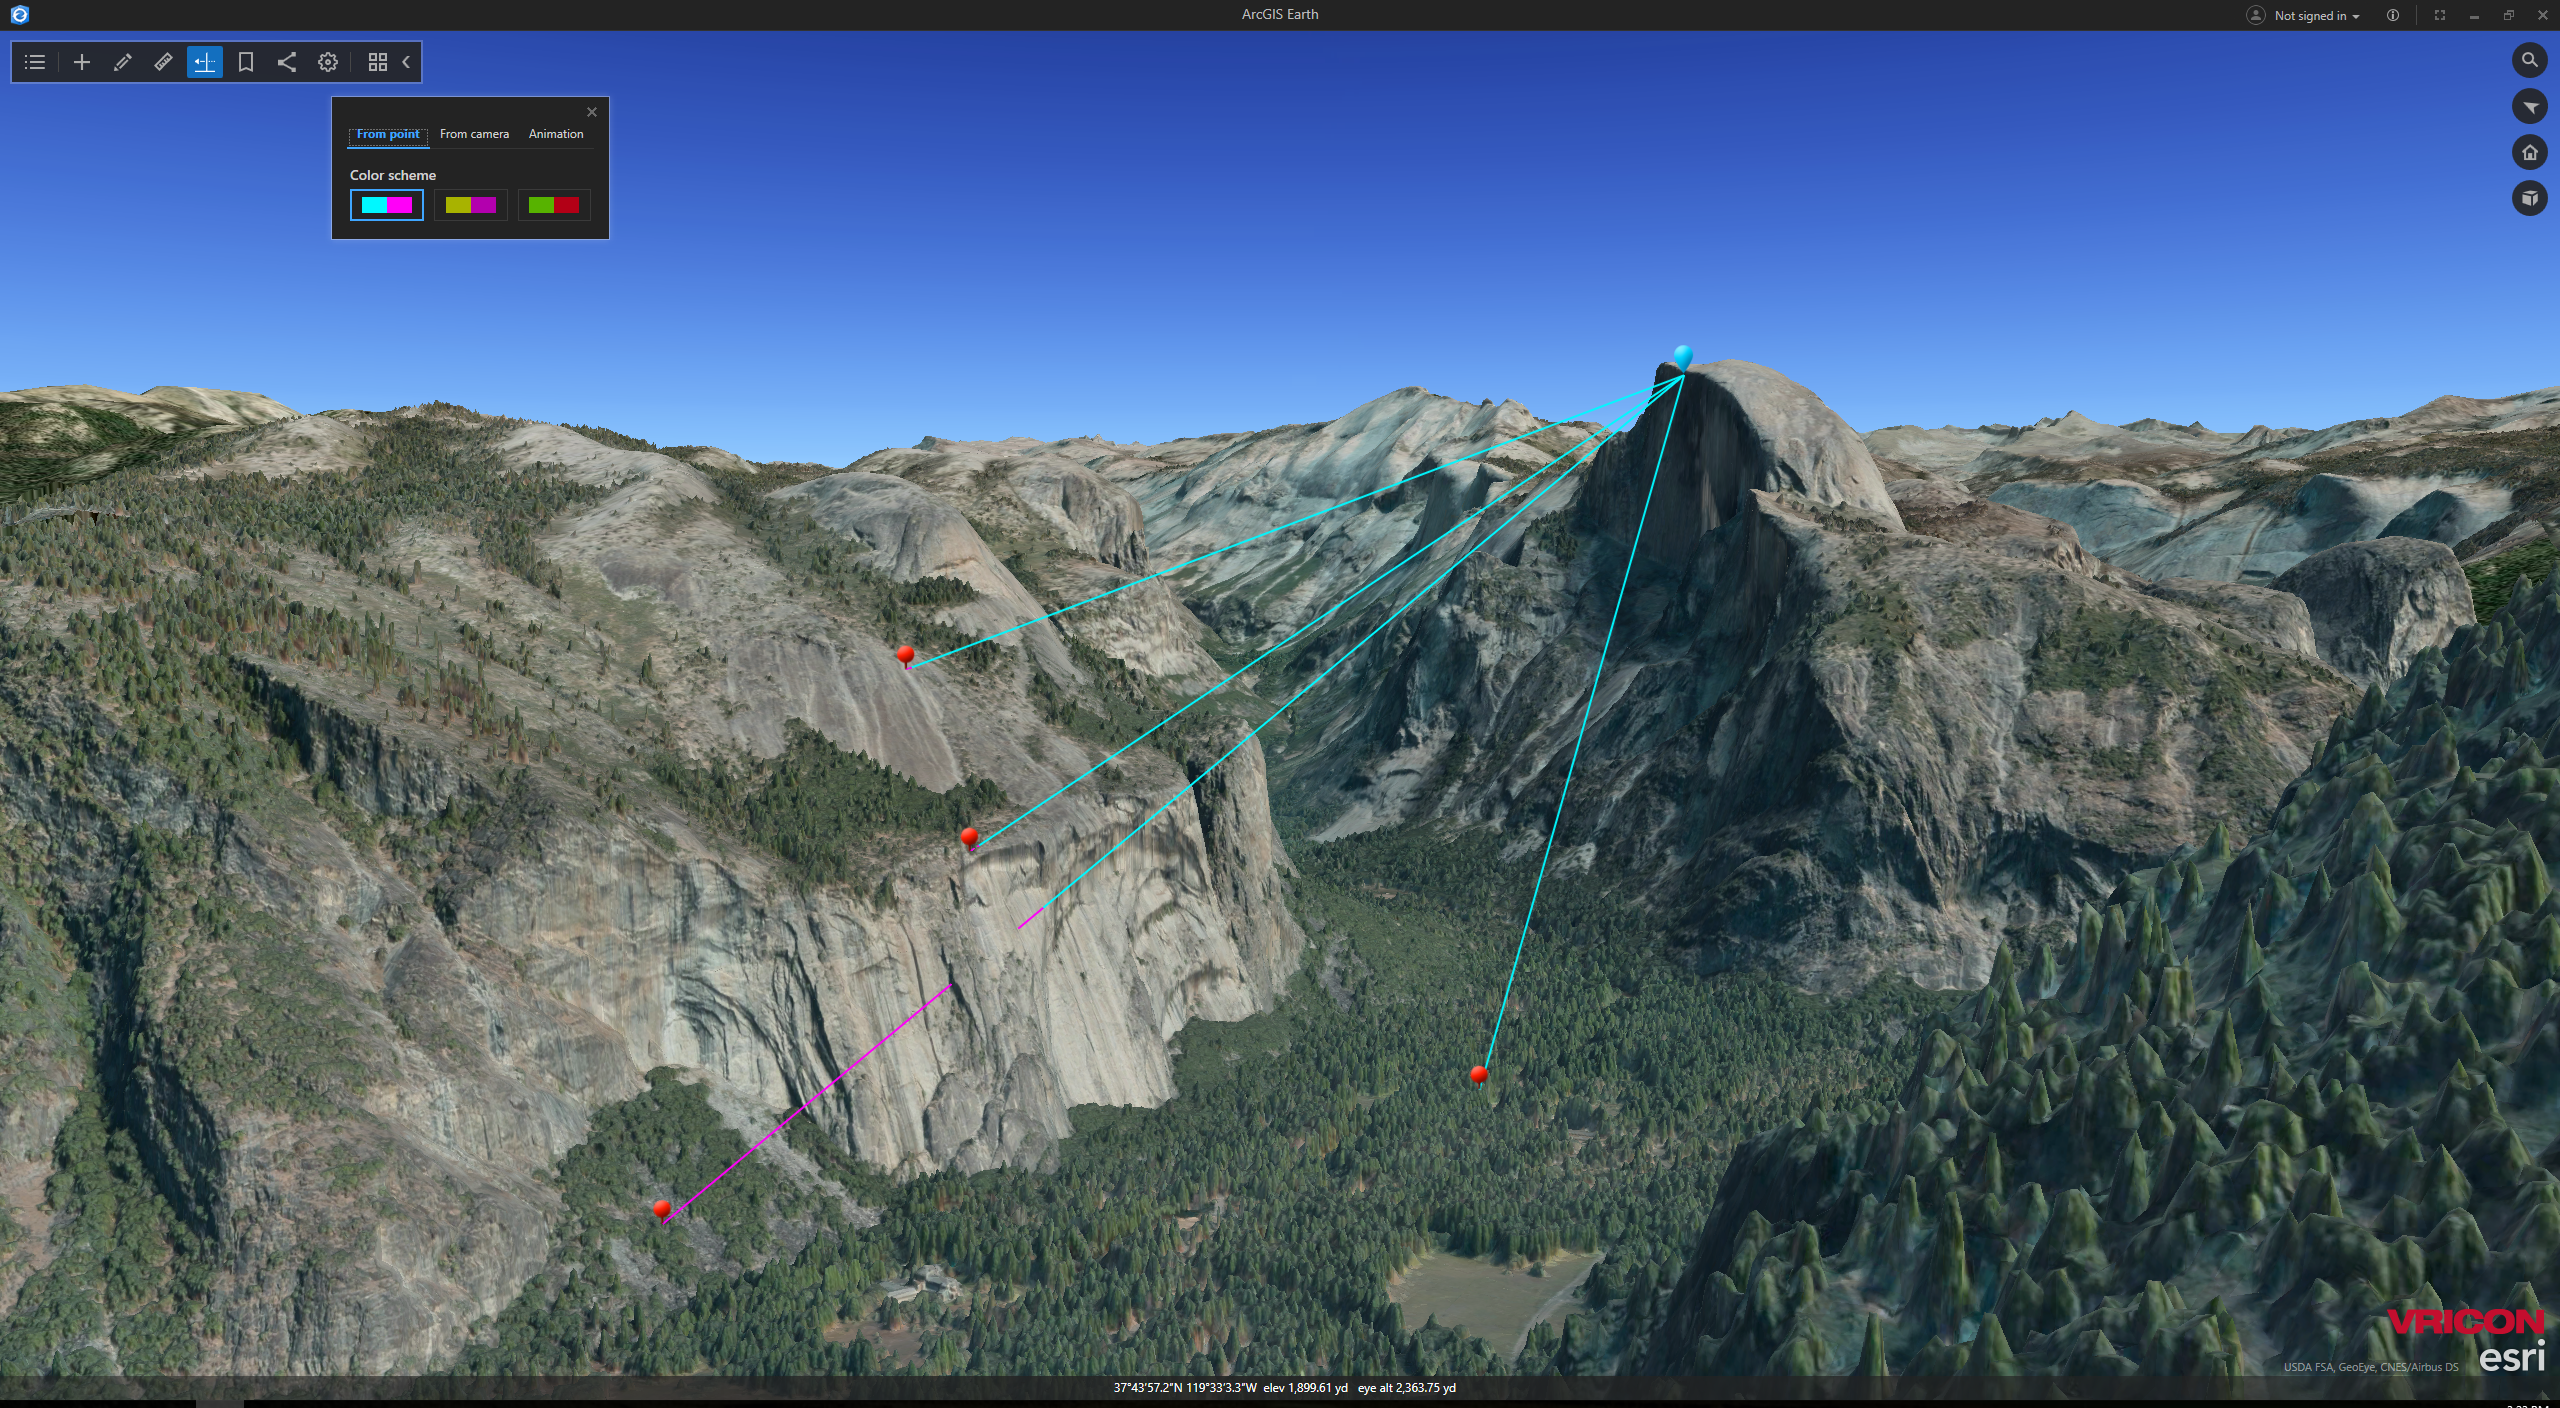 Using line of sight capability to analyze sight view near half dome, Yosemite national park. Imagery data from Esri partner Vricon. 